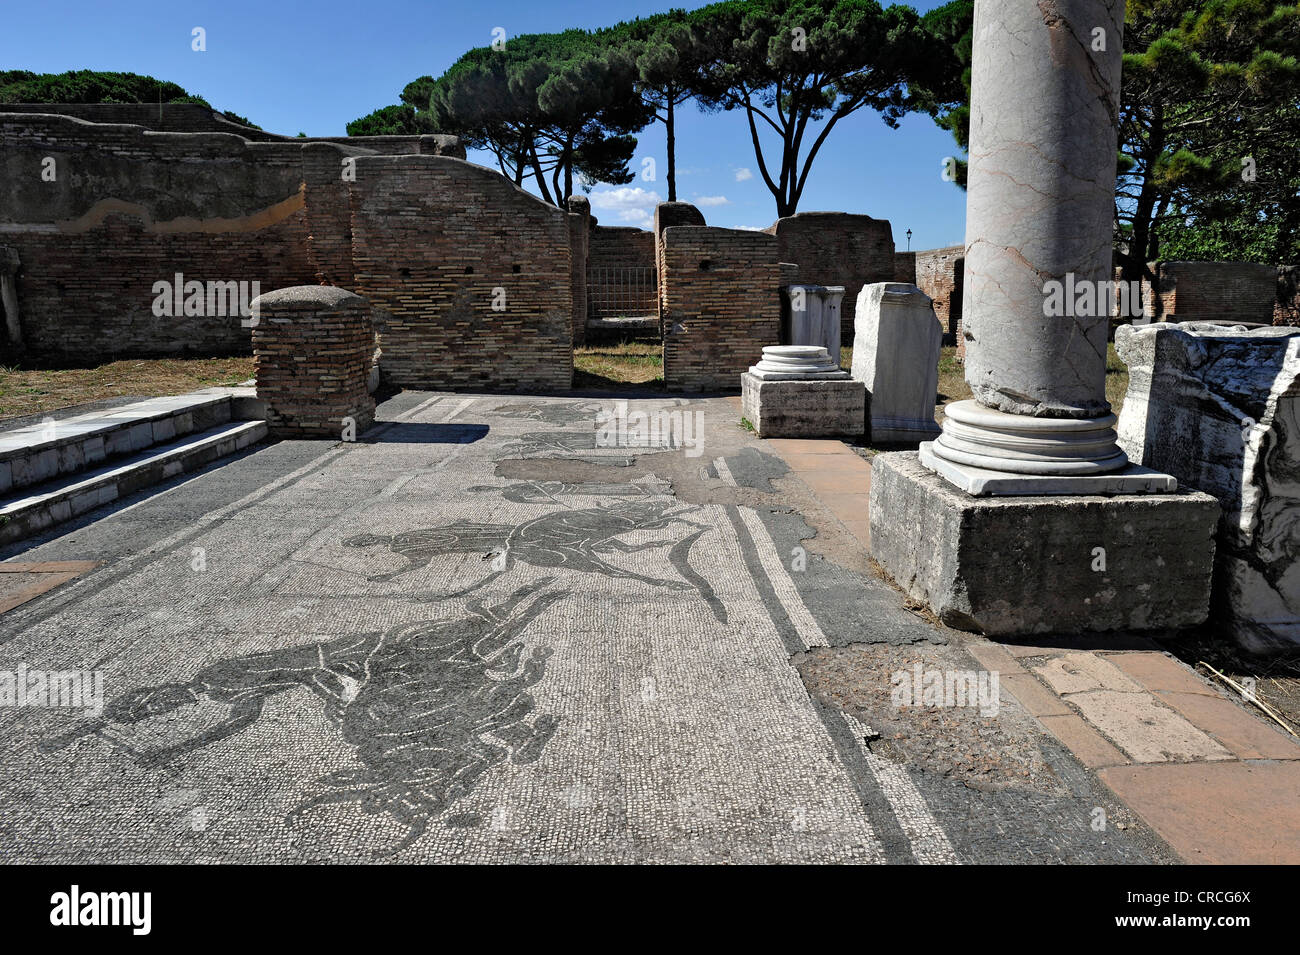 Mosaics in the ruins of the police barracks of Caserma dei Vigili, Ostia Antica archaeological site, ancient port city of Rome Stock Photo